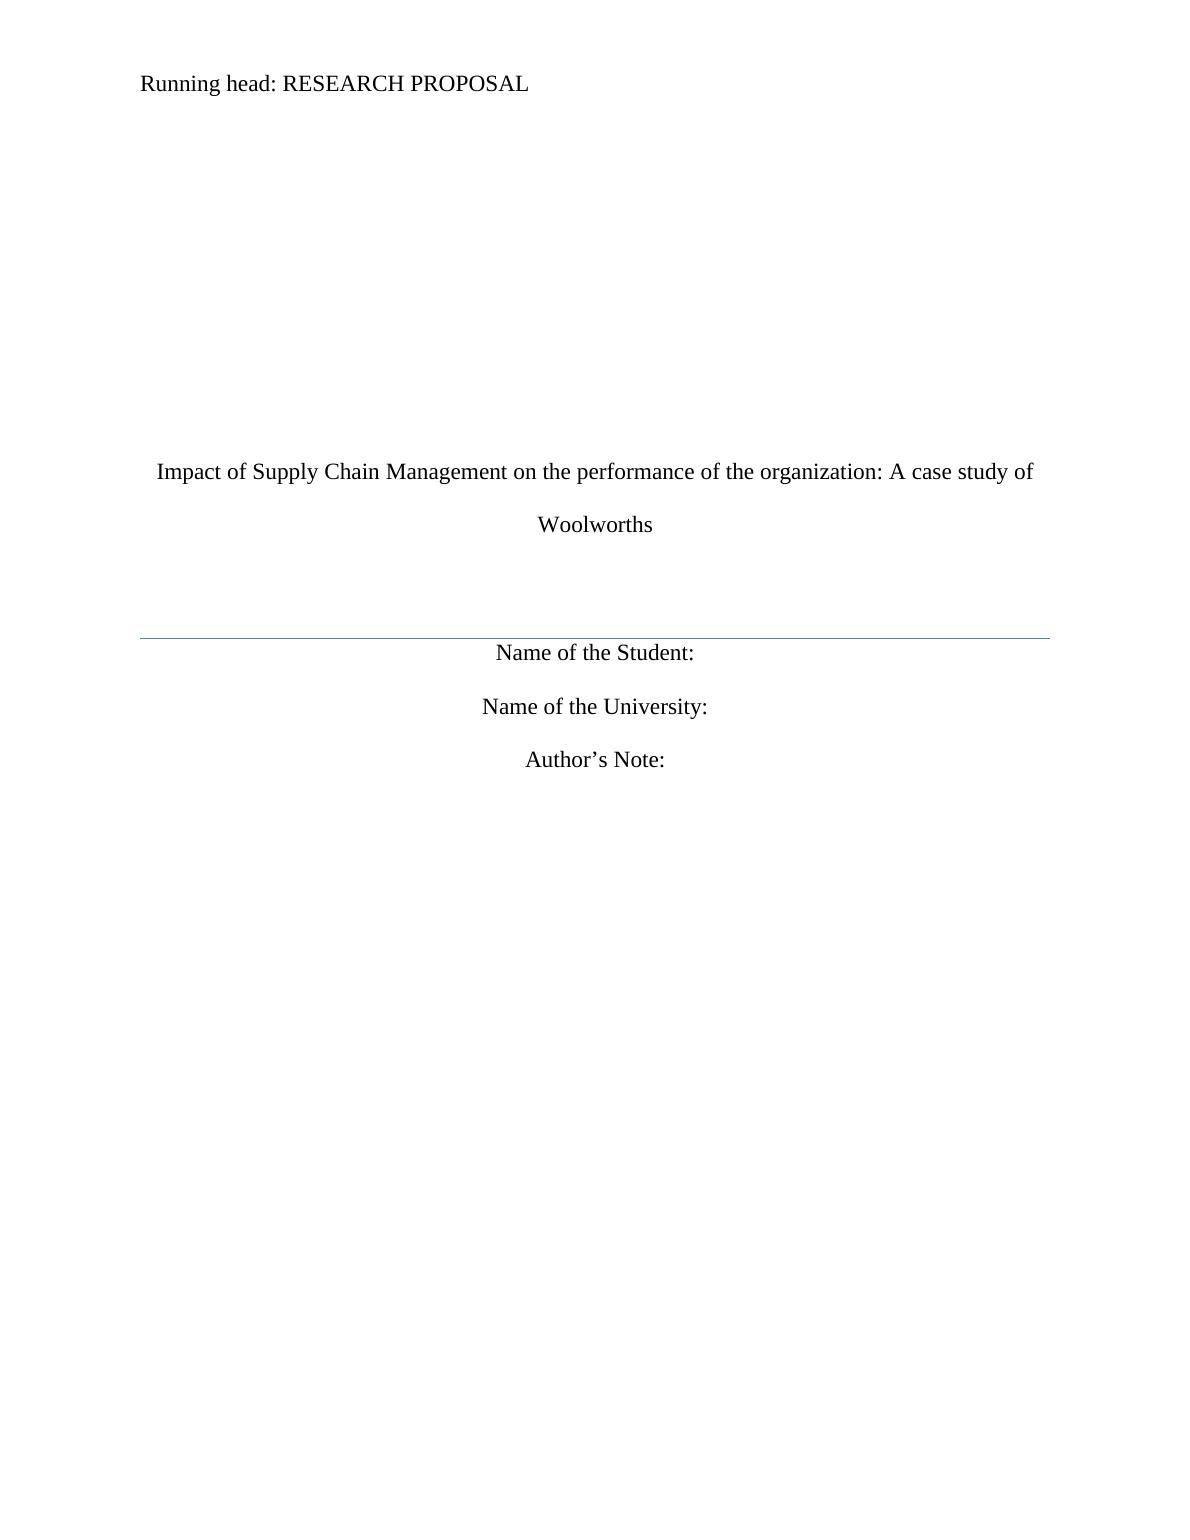 Assignment on Supply Chain Management (SCM)_1